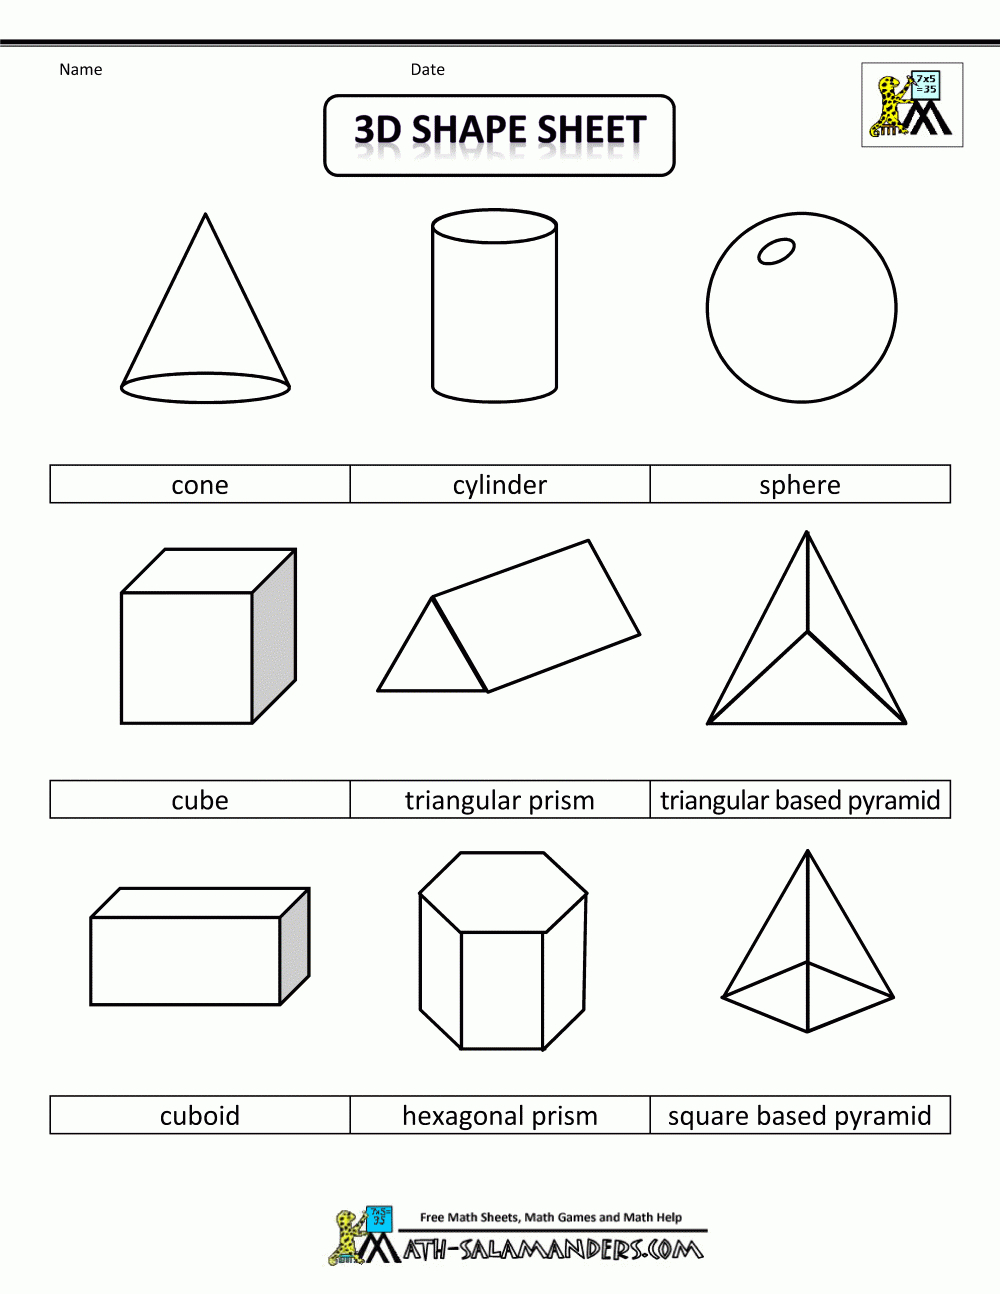 Printable Shapes 2D And 3D - Free Printable Geometric Shapes